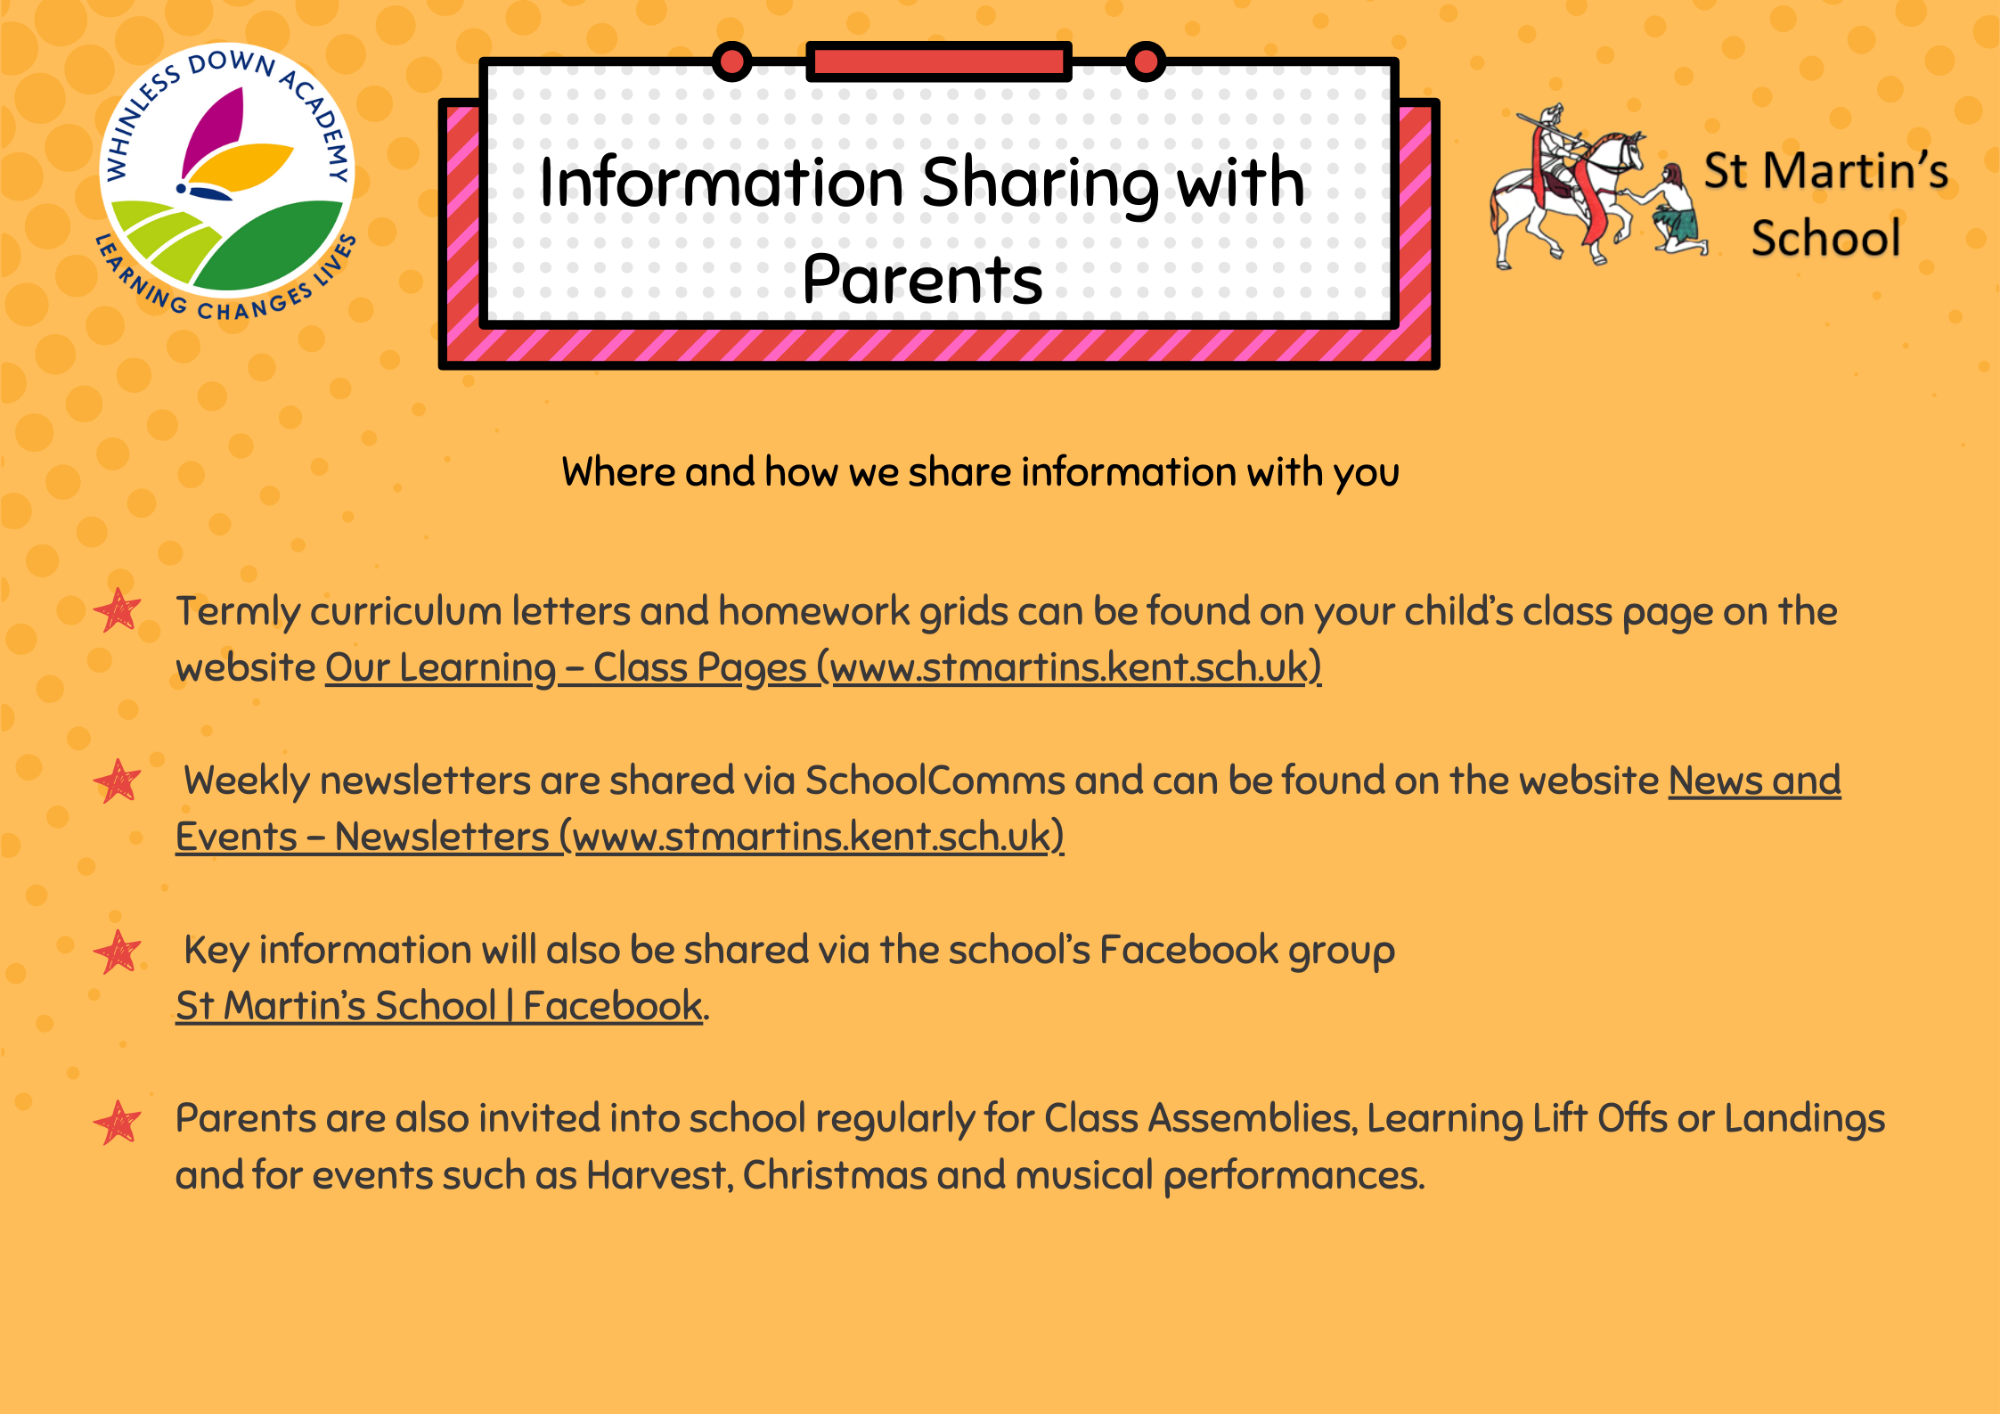 How we share information with parents